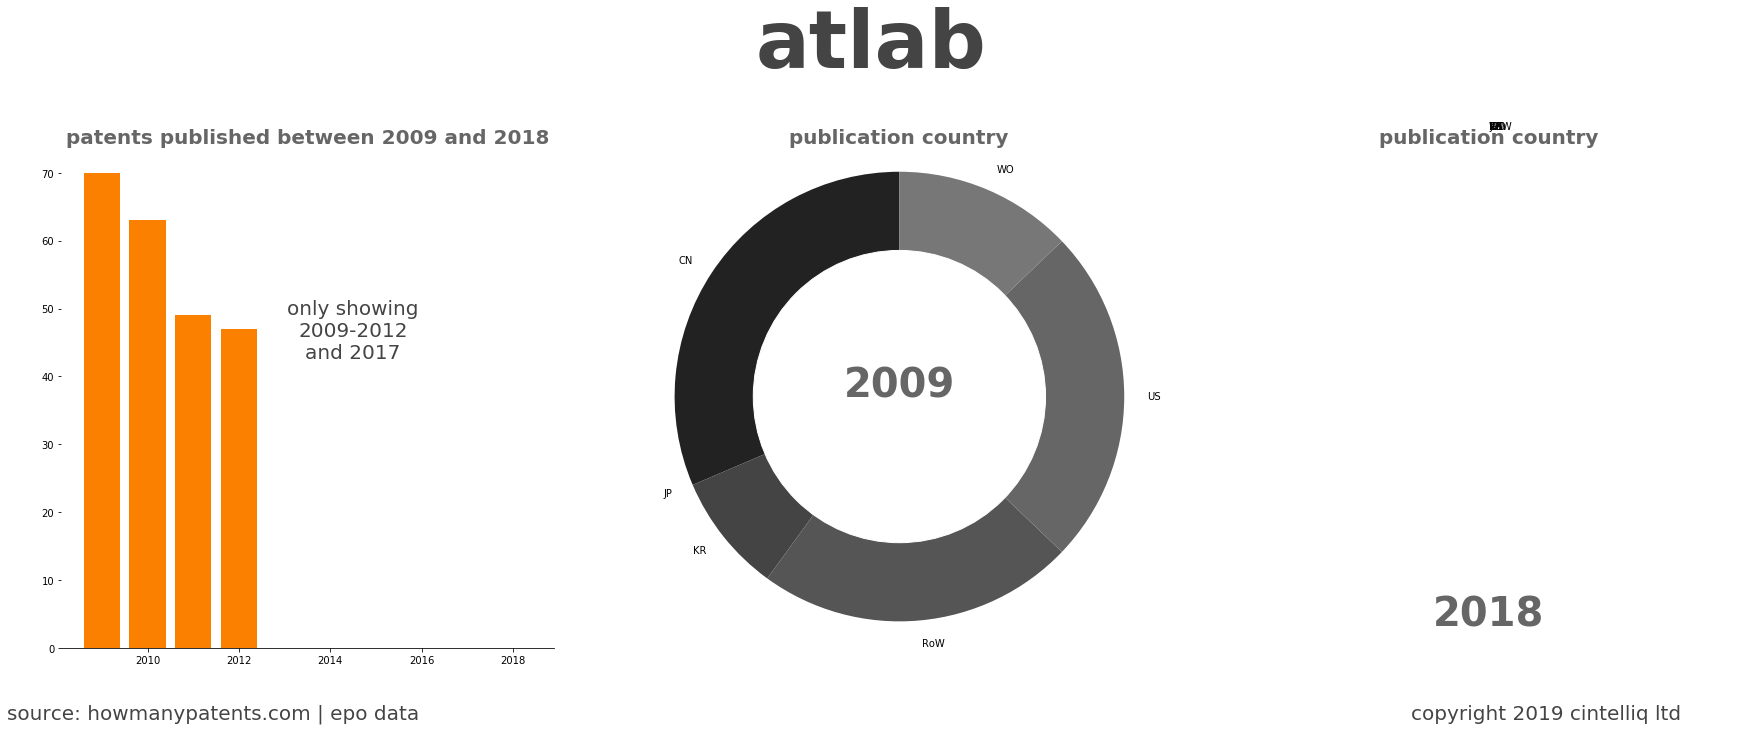 summary of patents for Atlab